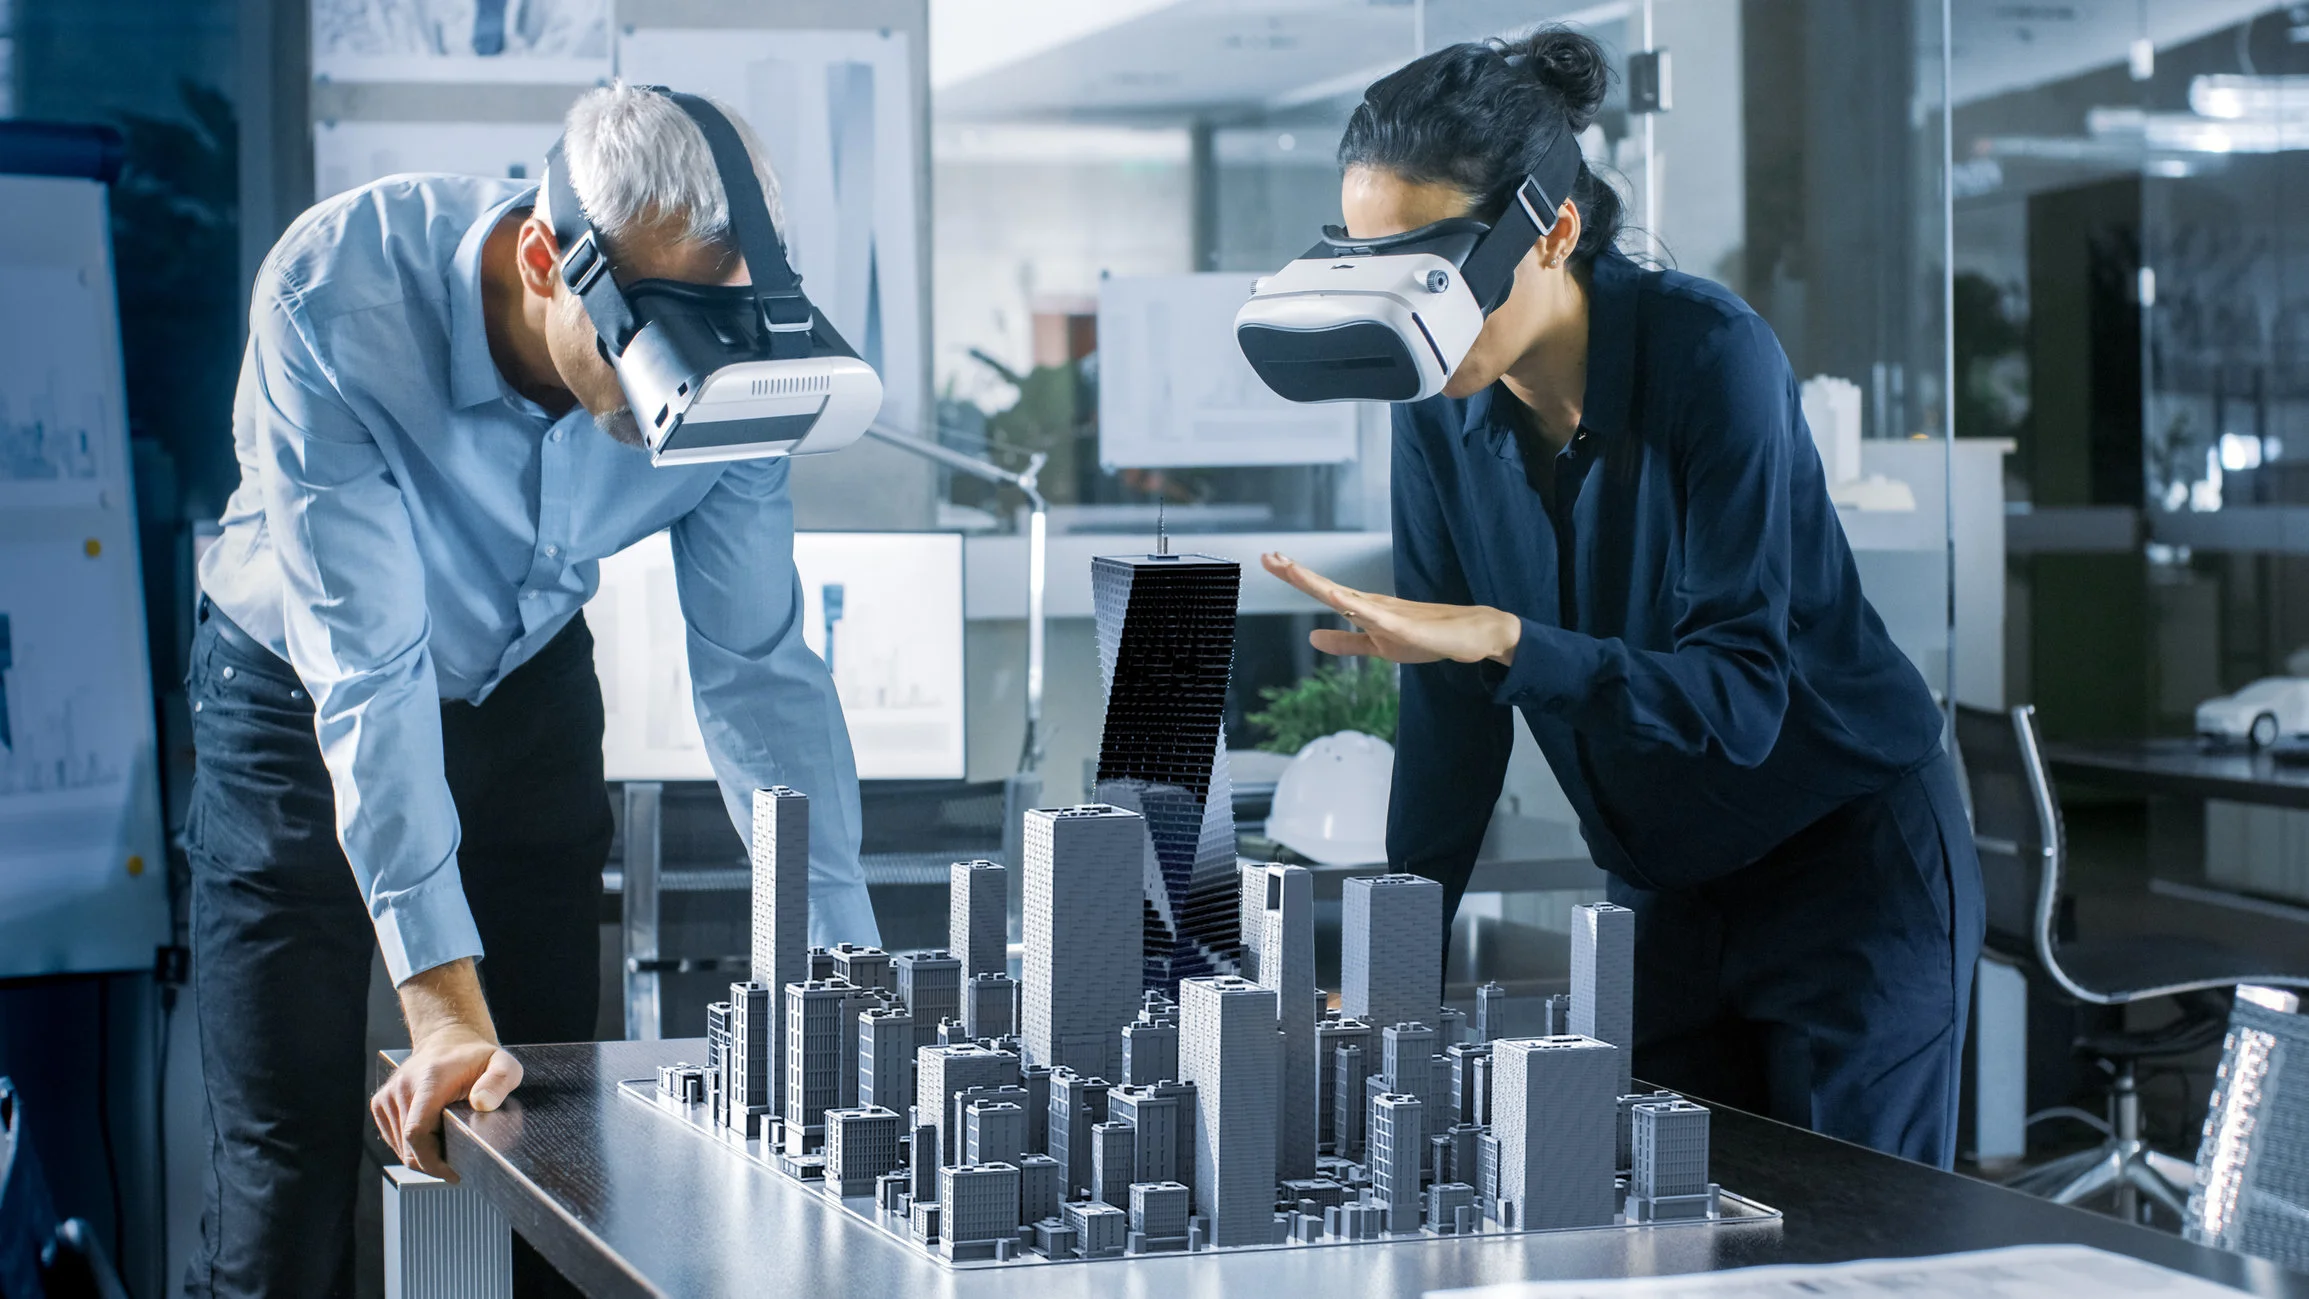 VR and AR Are Transforming The Commercial Construction Industry